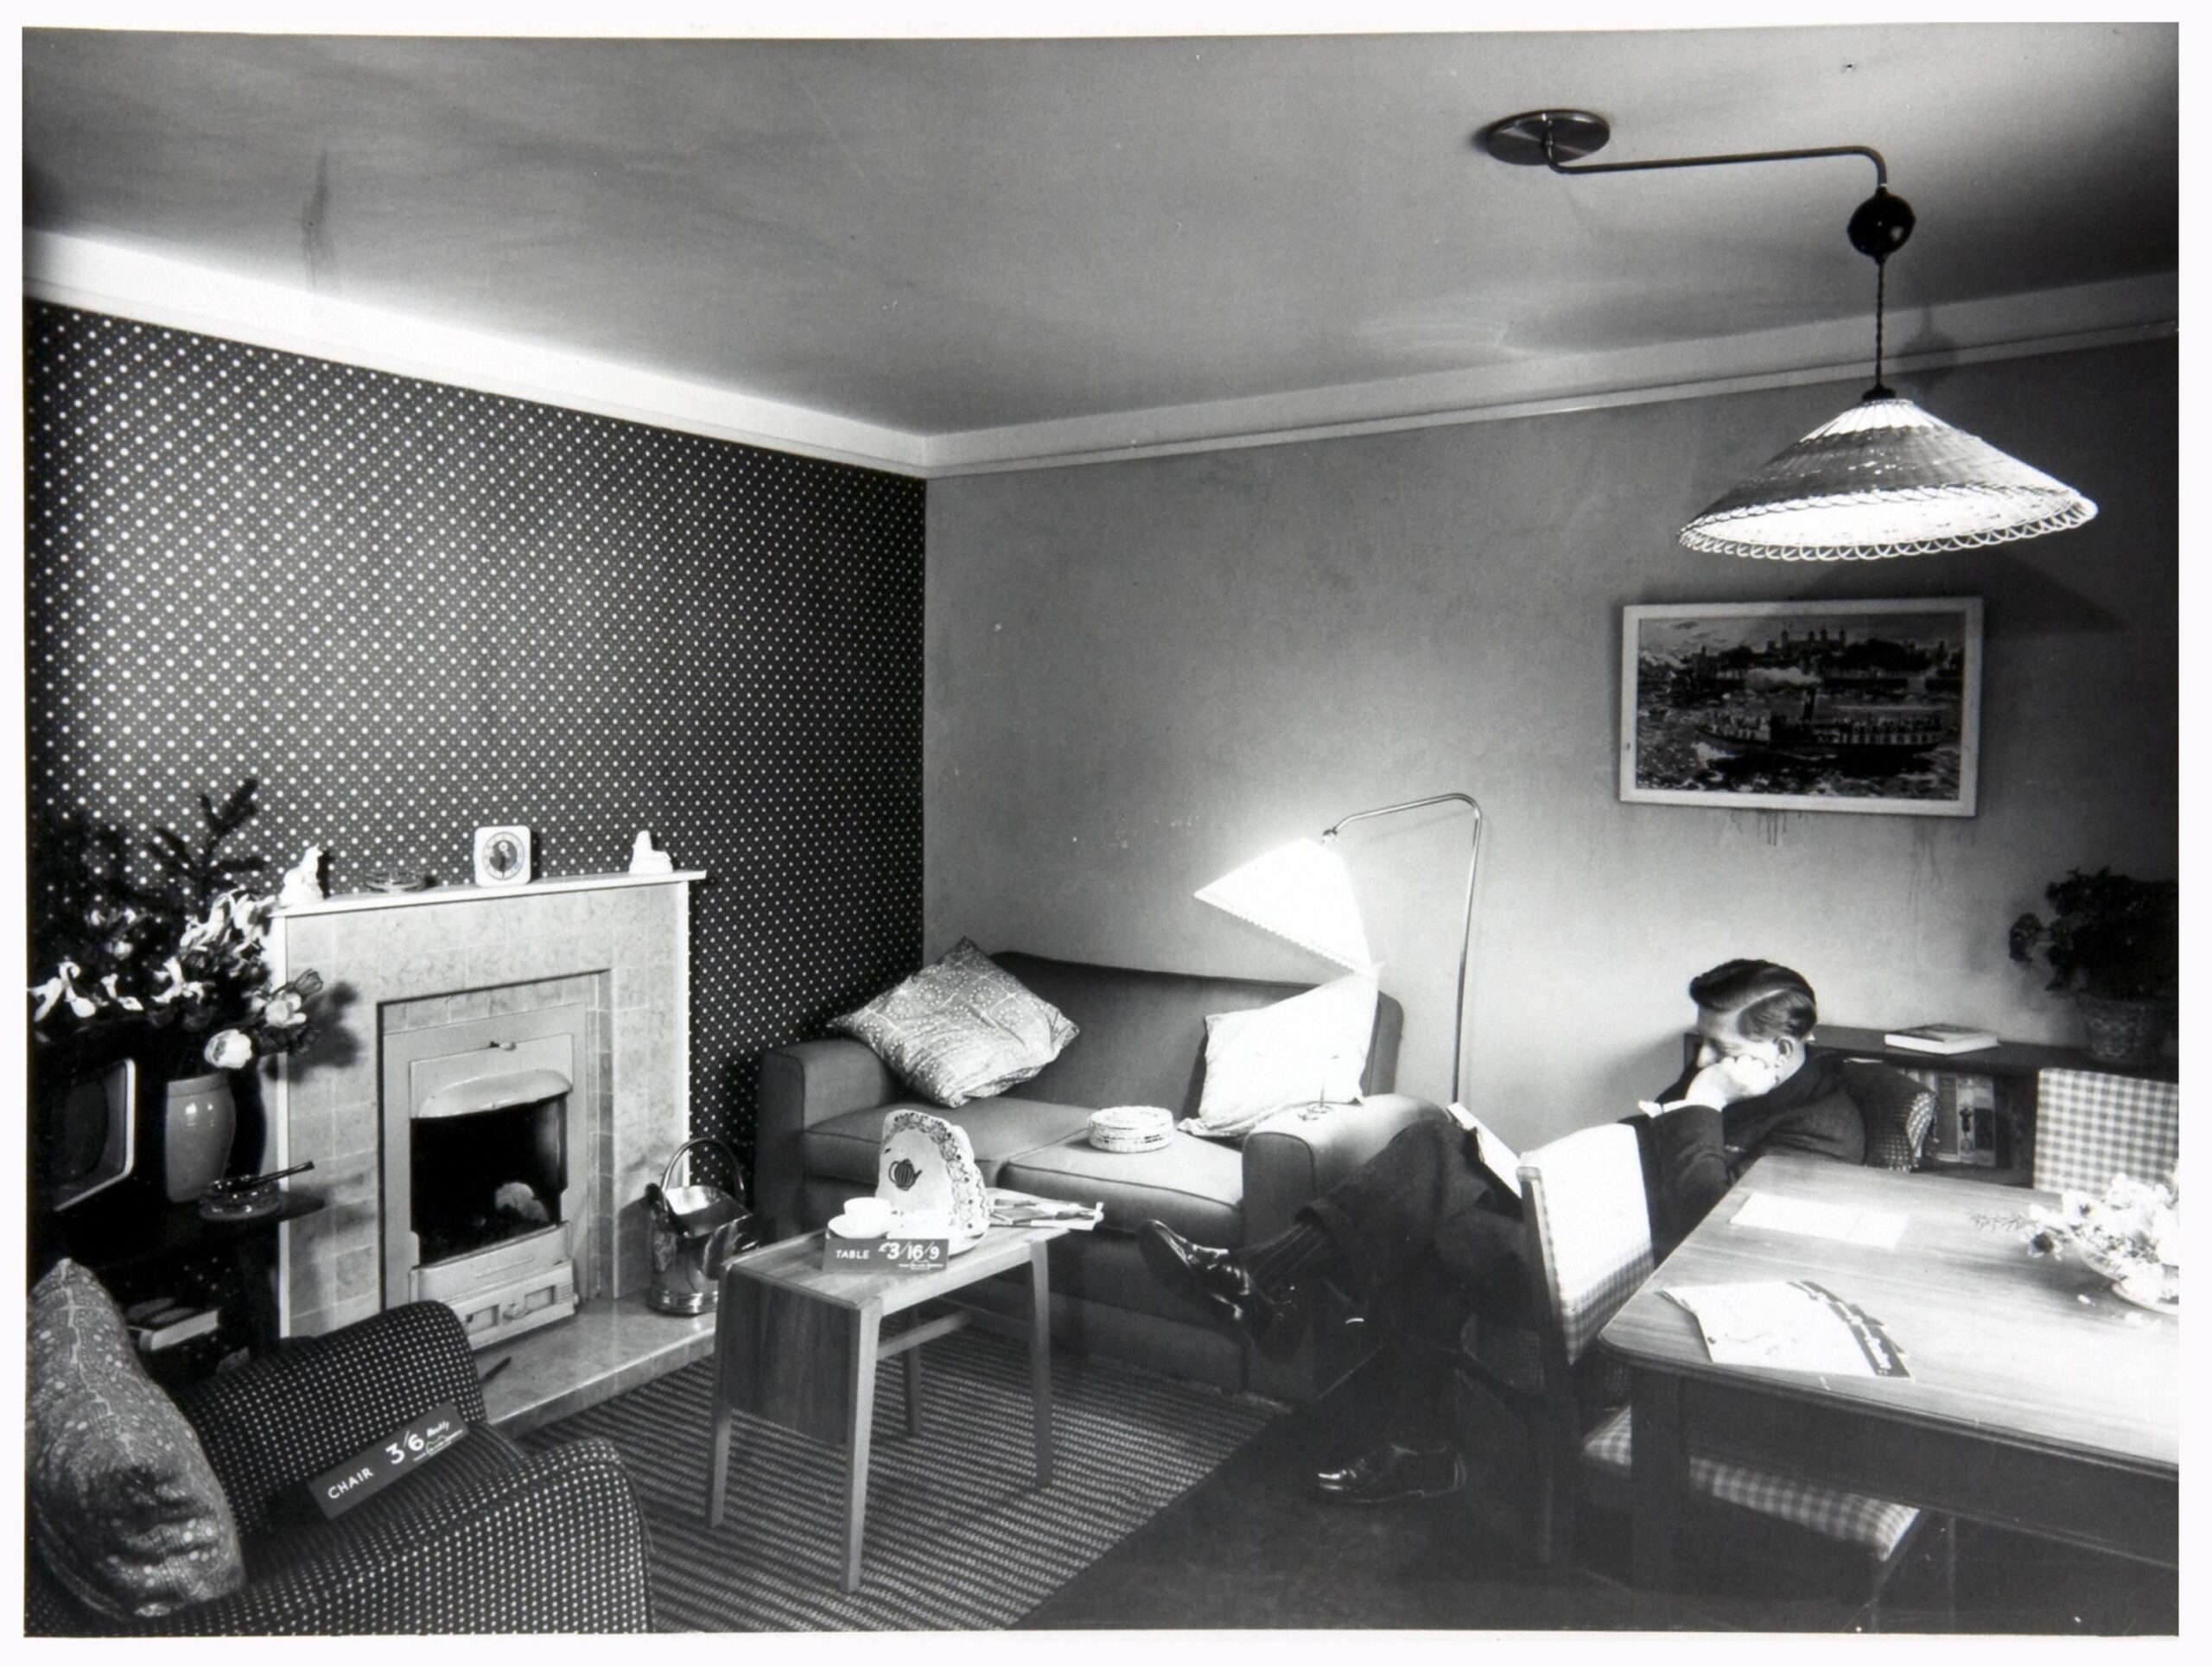 Photograph of a 1950s living room